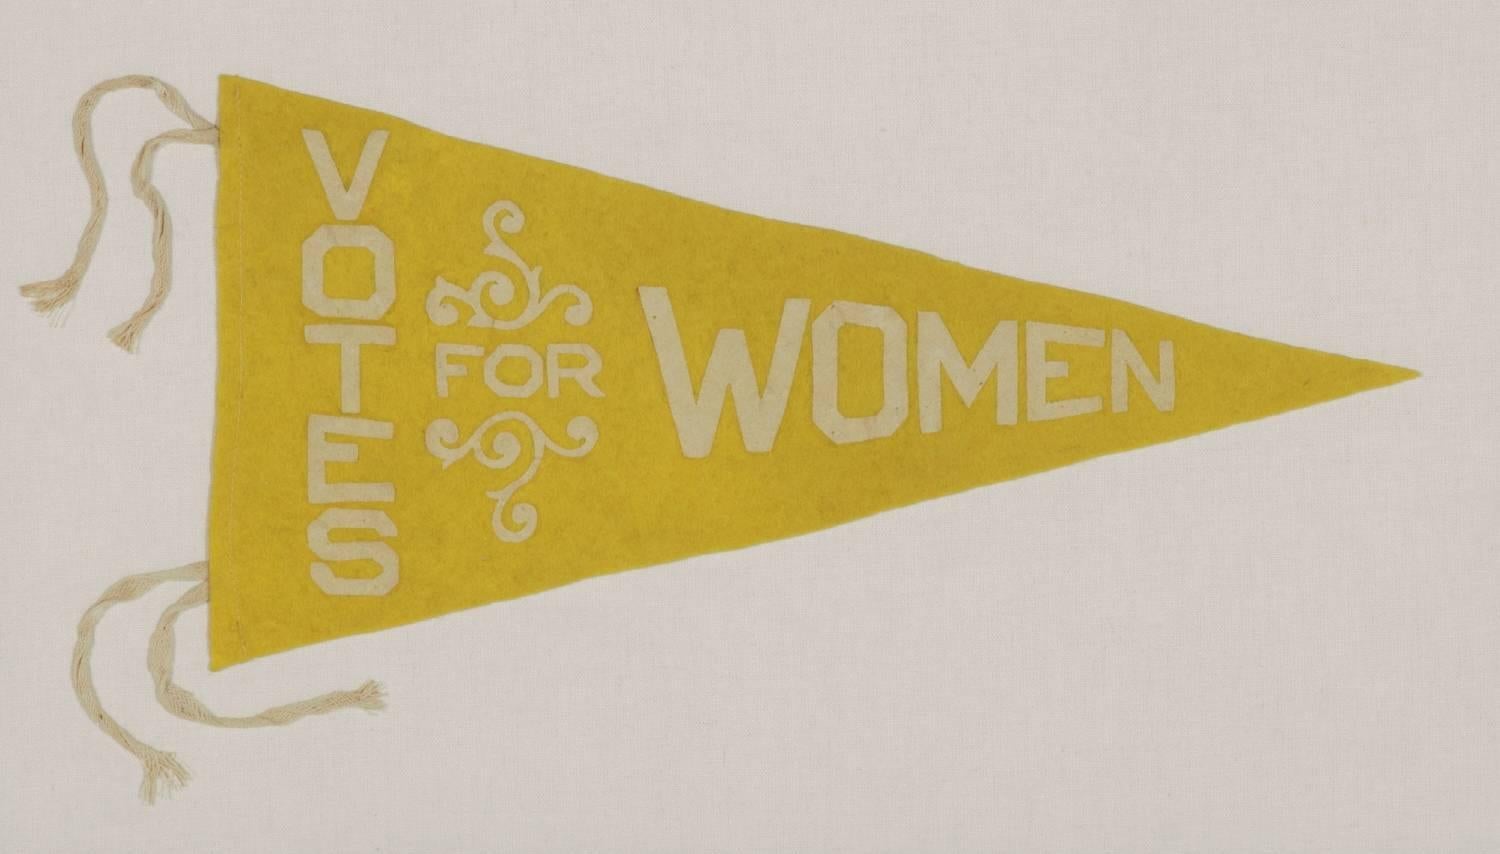 Triangular felt suffragette pennant with an interesting design and text that reads: 